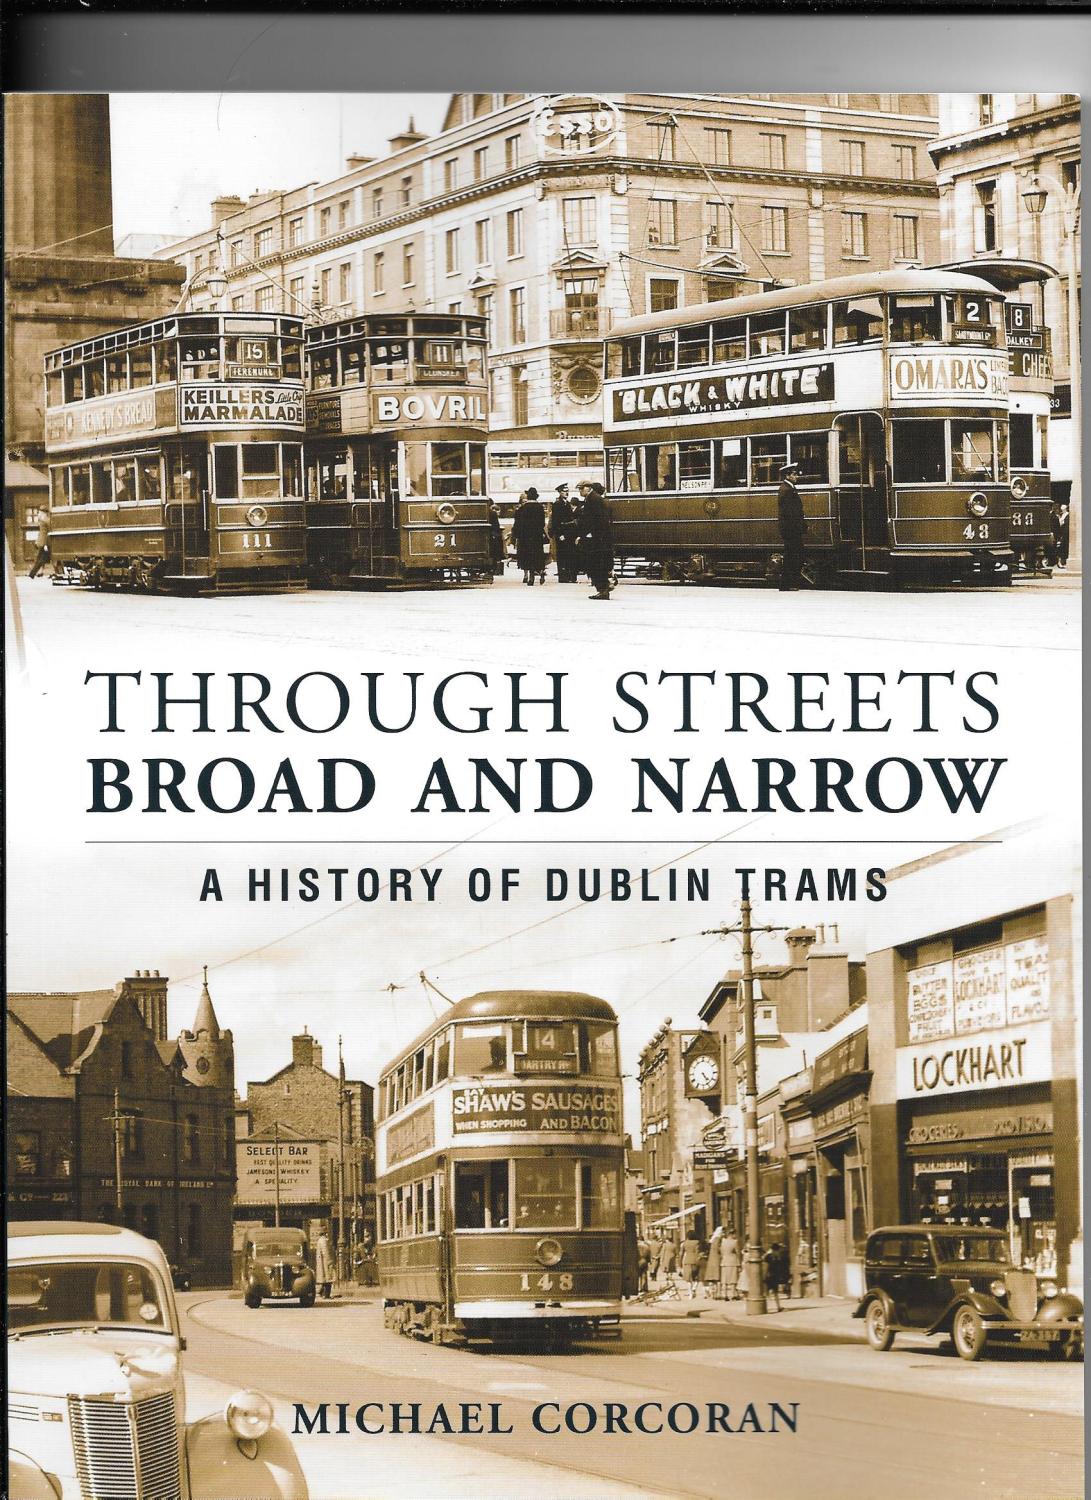 Through Streets Broad and Narrow: A History of Dublin Trams.